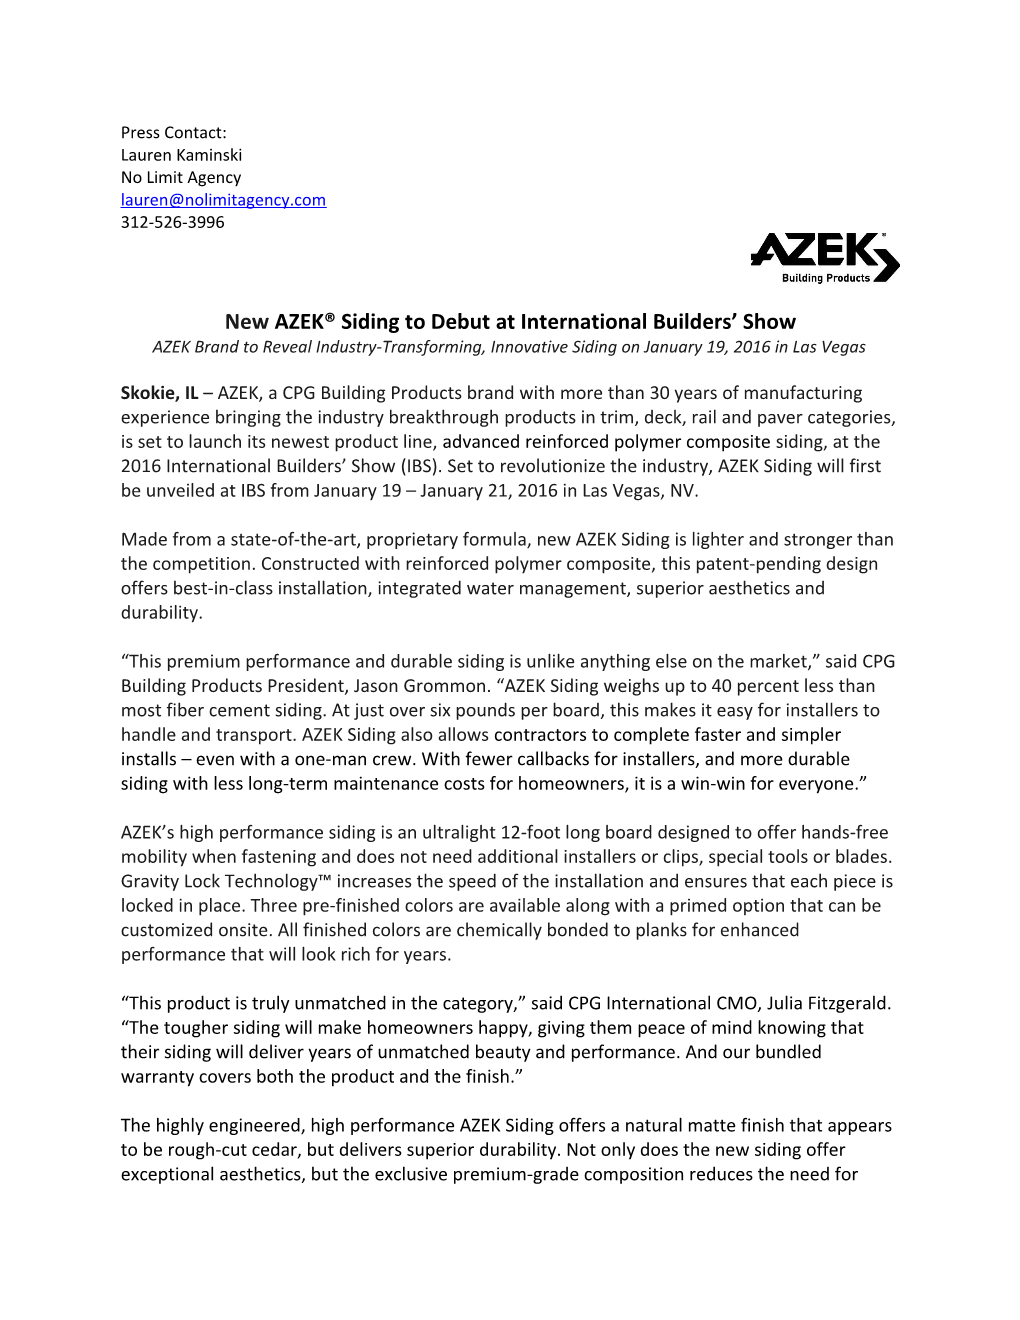 New AZEK Siding to Debut at International Builders Show